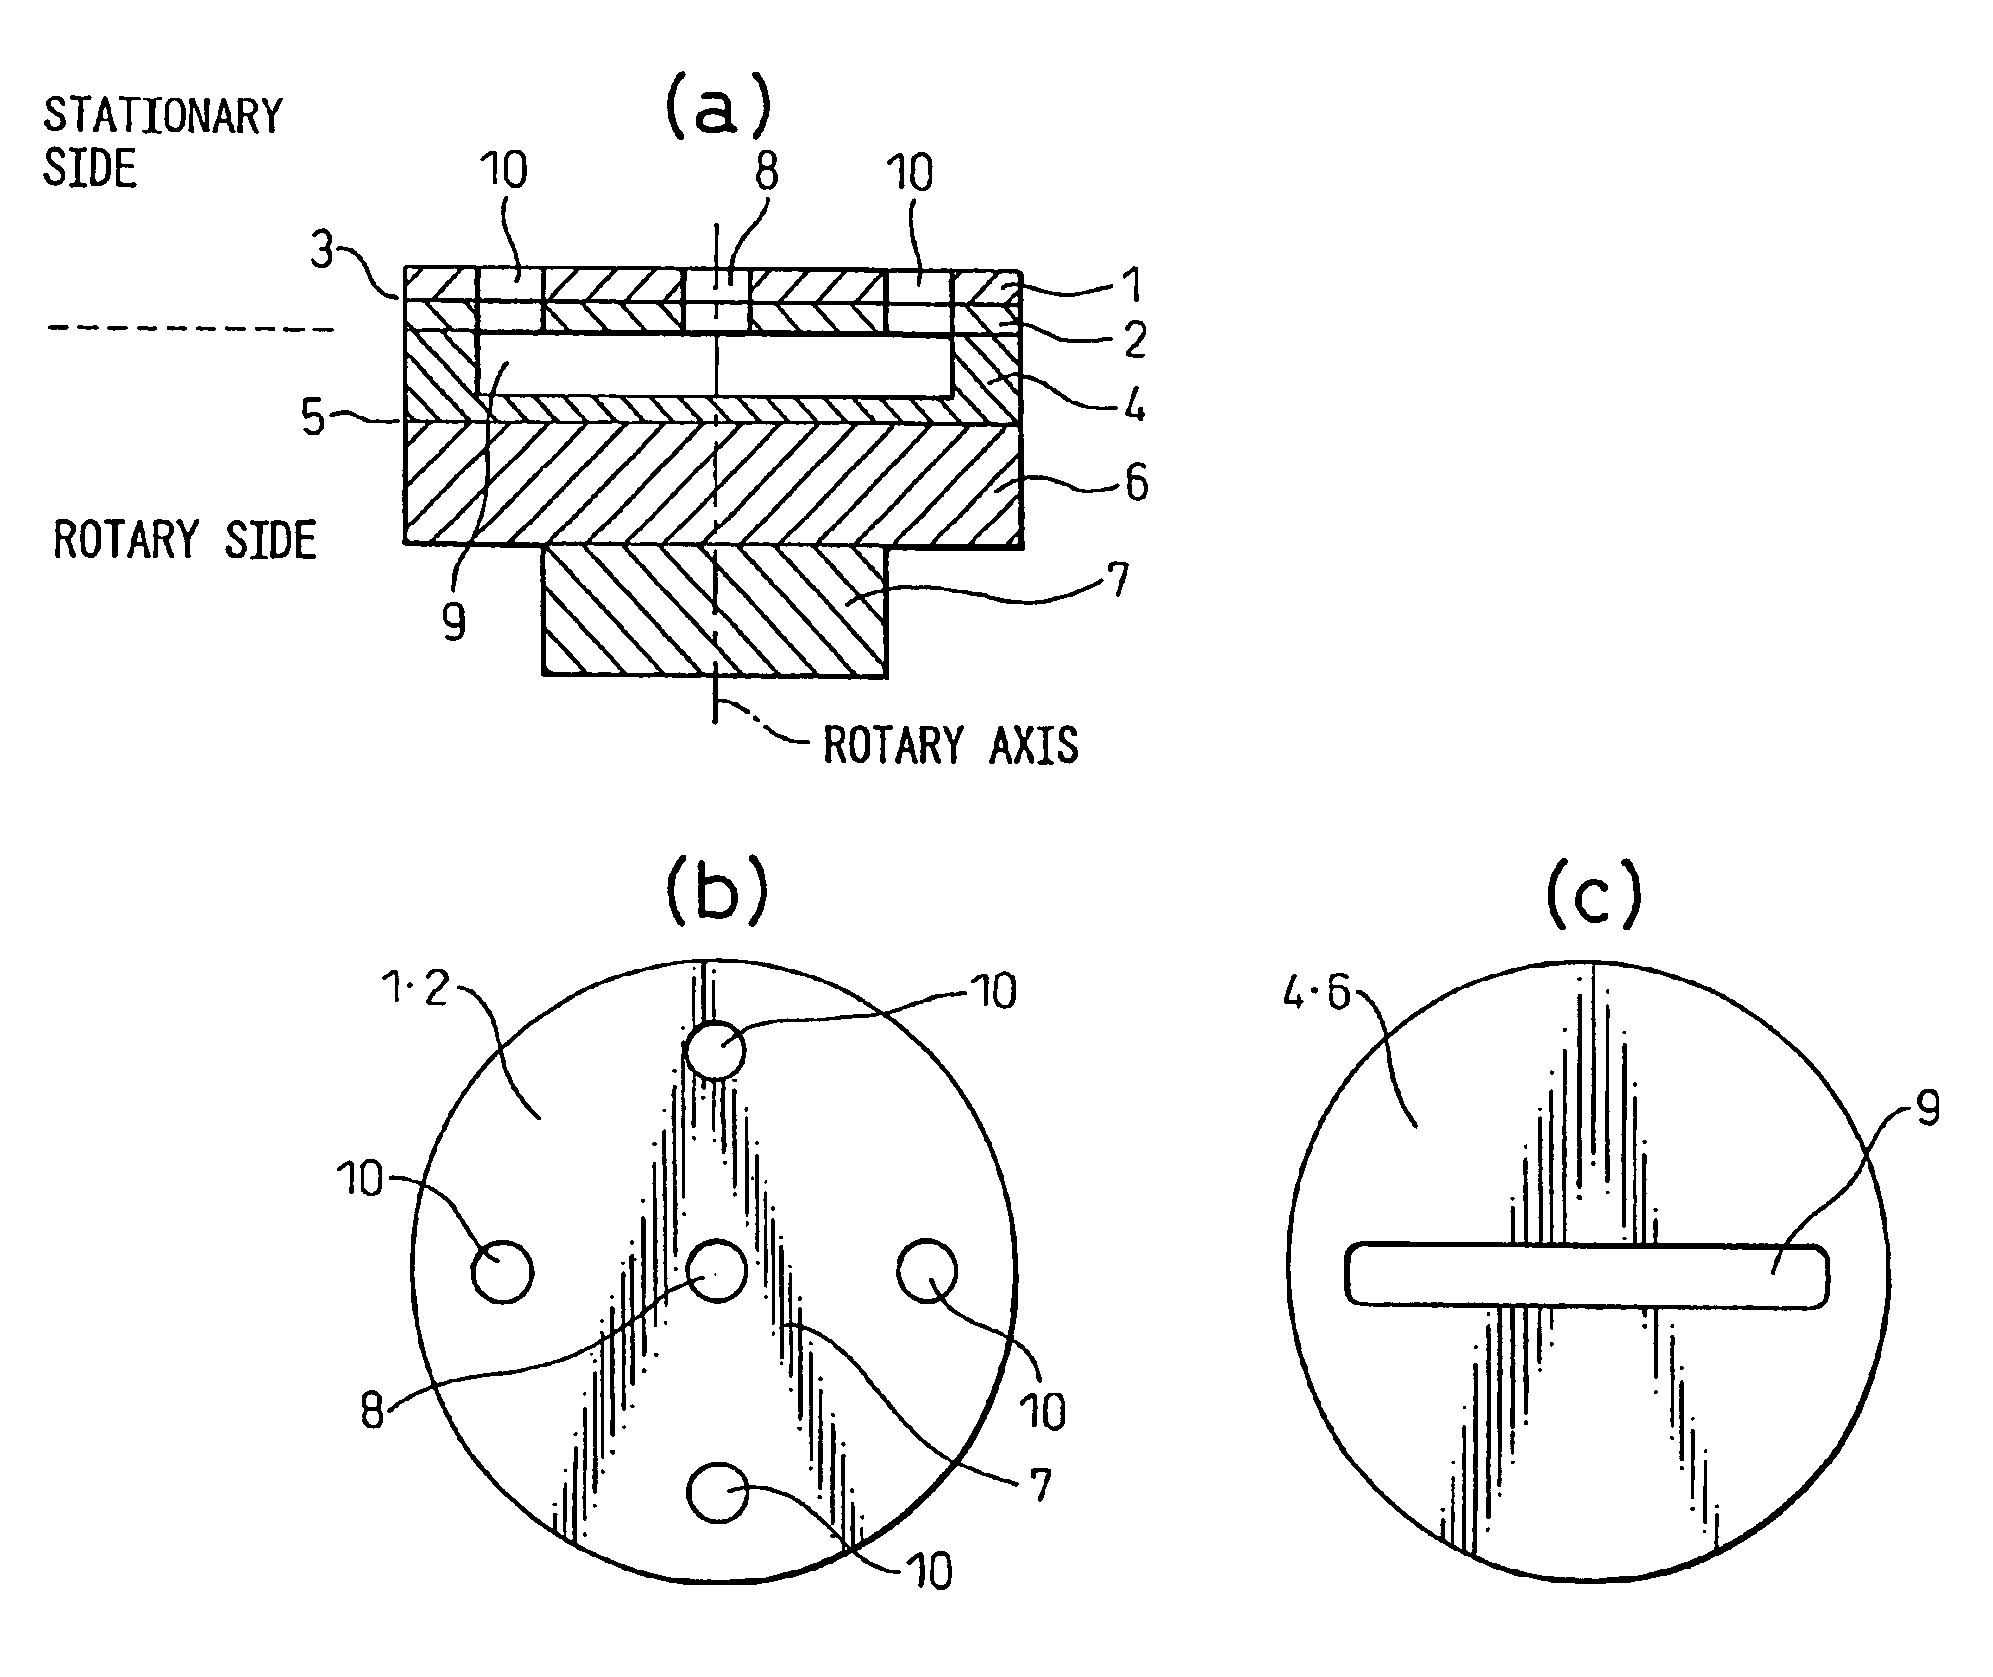 Rotary-valve and adsorption separation system